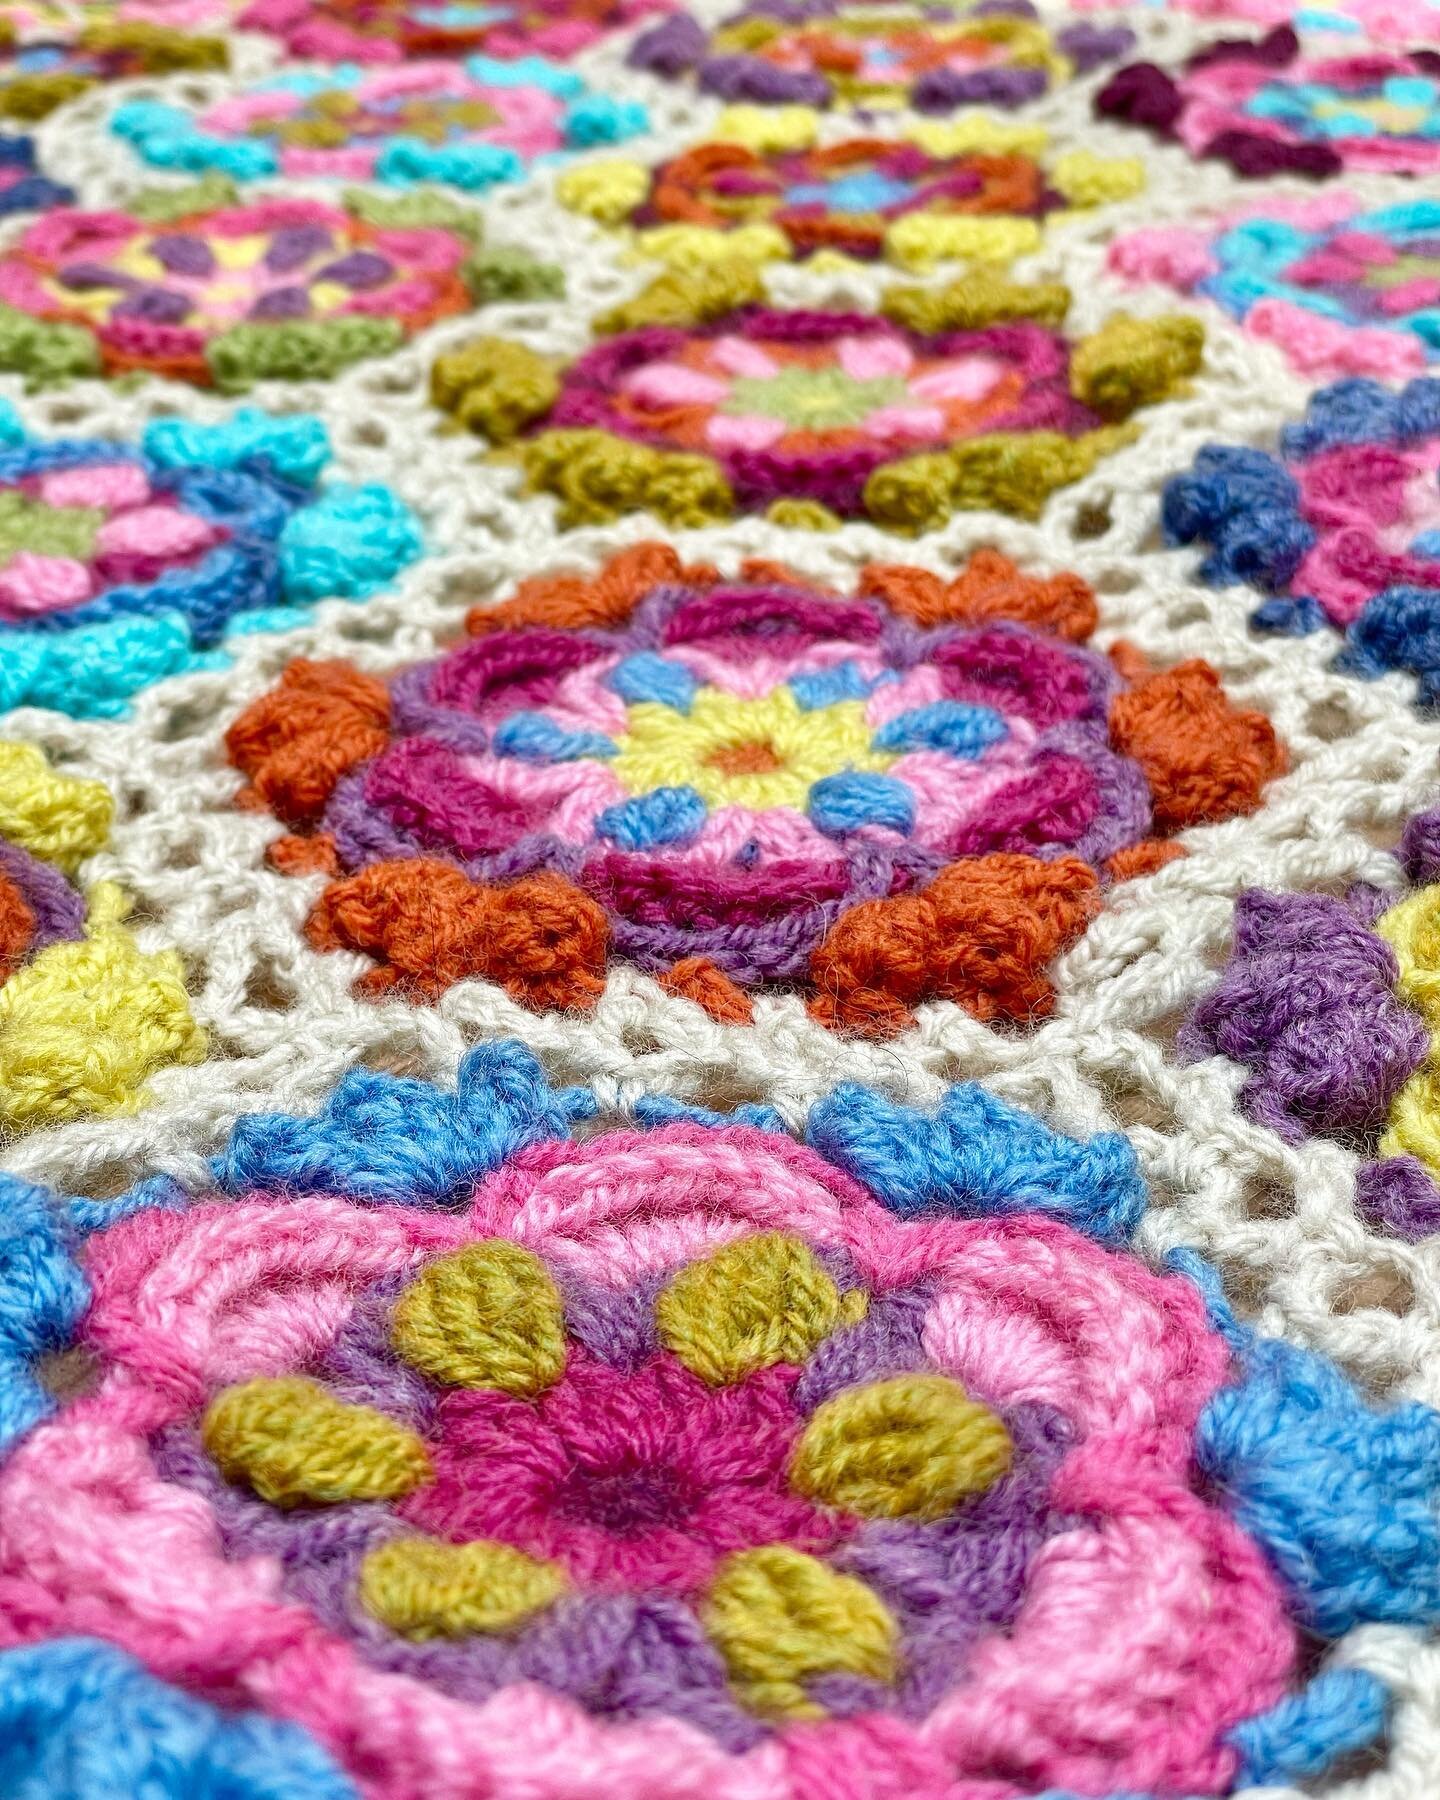 Much as I love my latest project it&rsquo;s taking me FOREVER to complete because for some reason I thought it&rsquo;d be cool to have each motif framed in a round of popcorns&hellip;. What was I thinking 😂?!!!

#crochetblanket #colourfulcrochet #cr